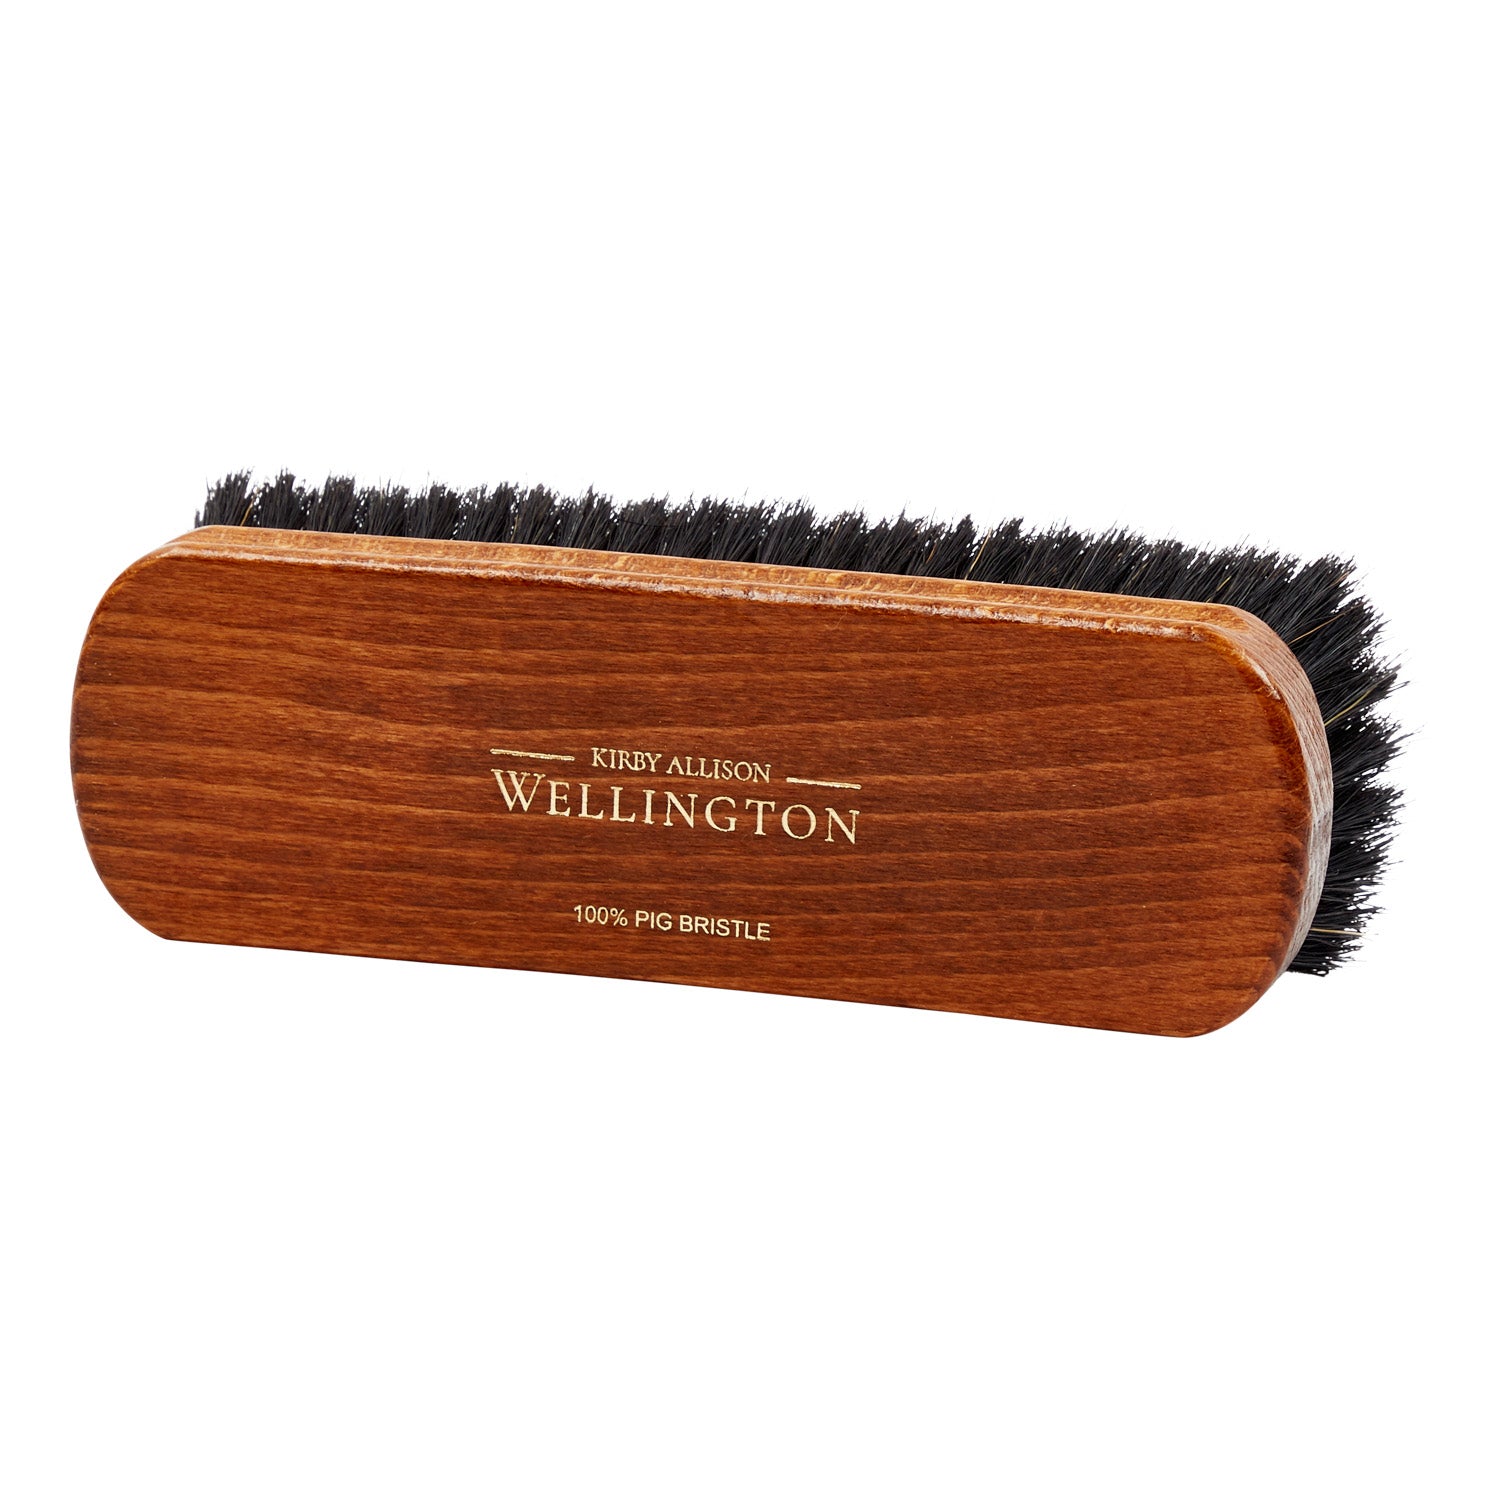 A Deluxe Wellington Pig Bristle Shoe Polishing Brush from KirbyAllison.com for shoe polishing with textured leathers and pig bristle.